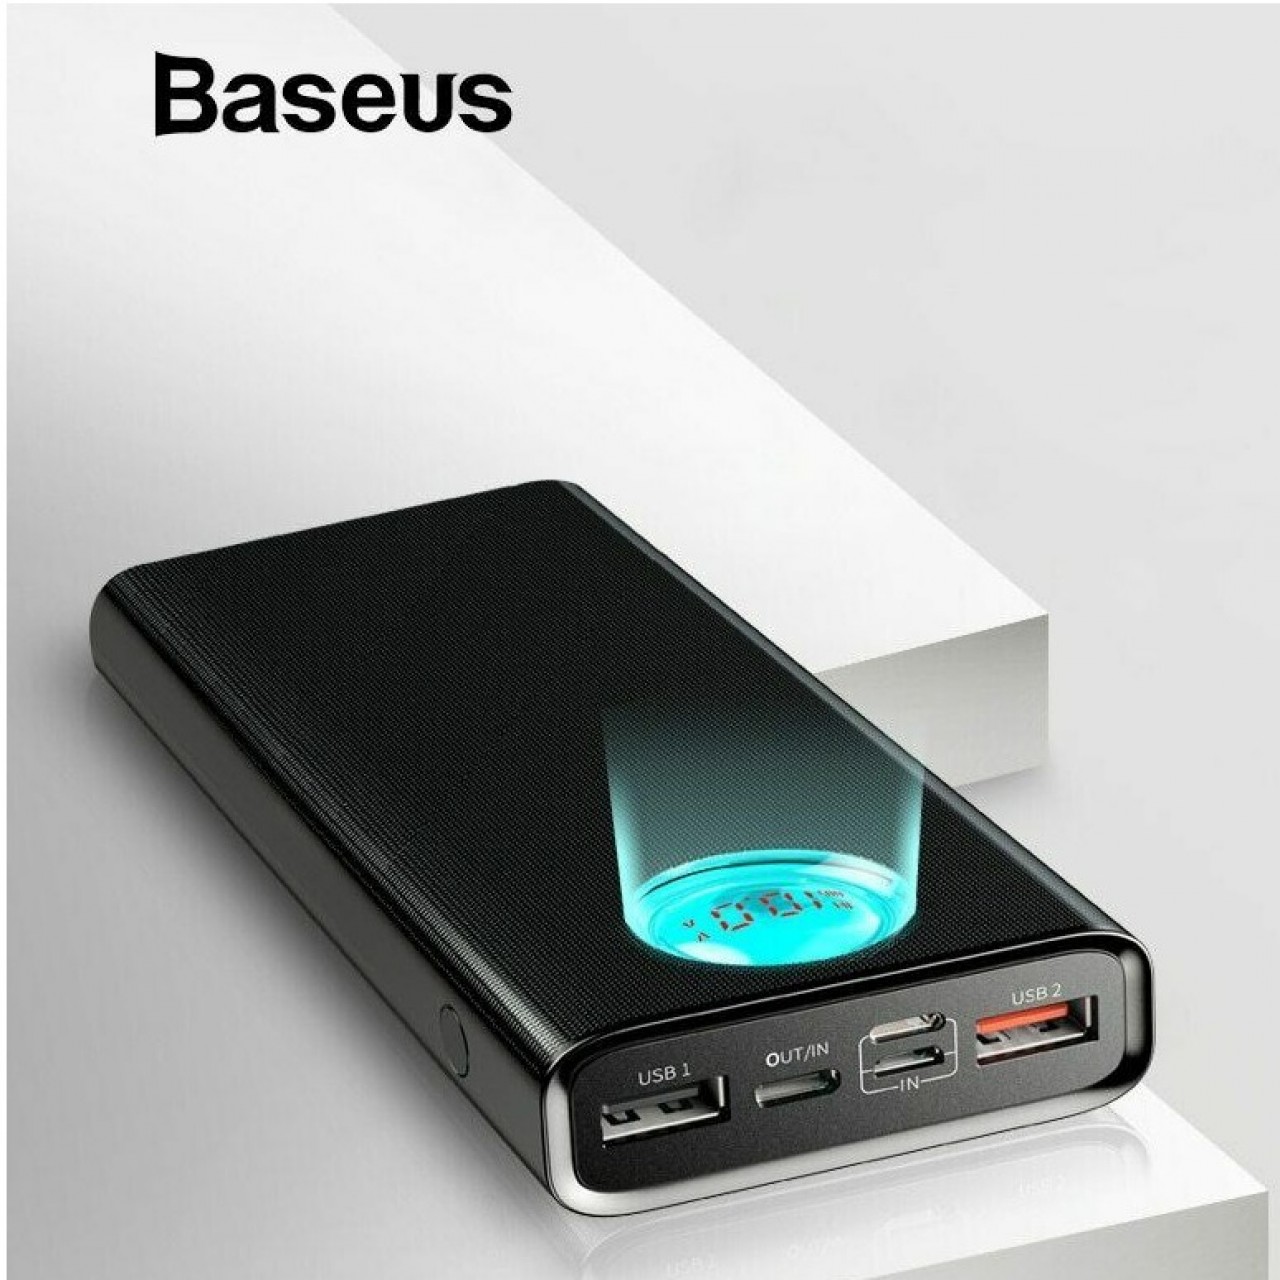 Baseus Quick Charge 3.0 Type C PD Fast Charge Power Bank 20000 mAh